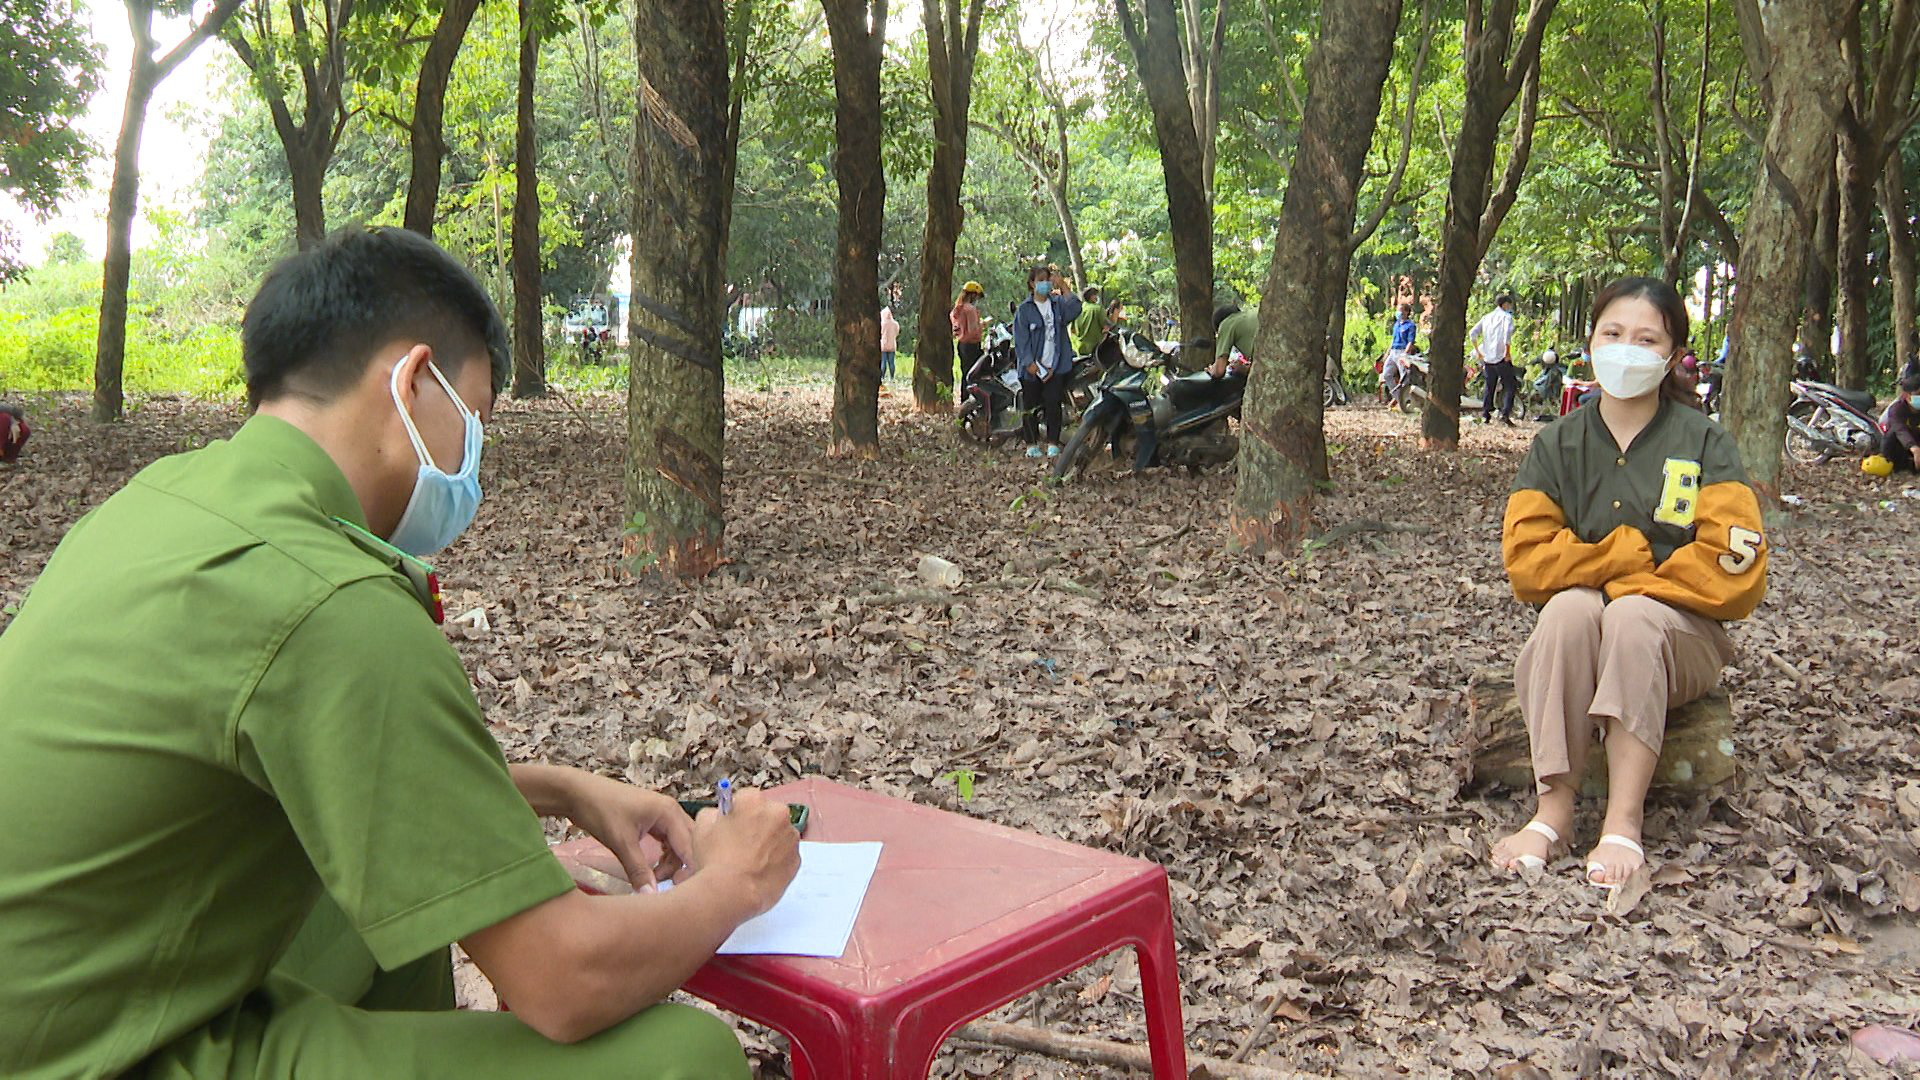 Company, employees fined for gathering at plantation for work against COVID-19 ban in Vietnam